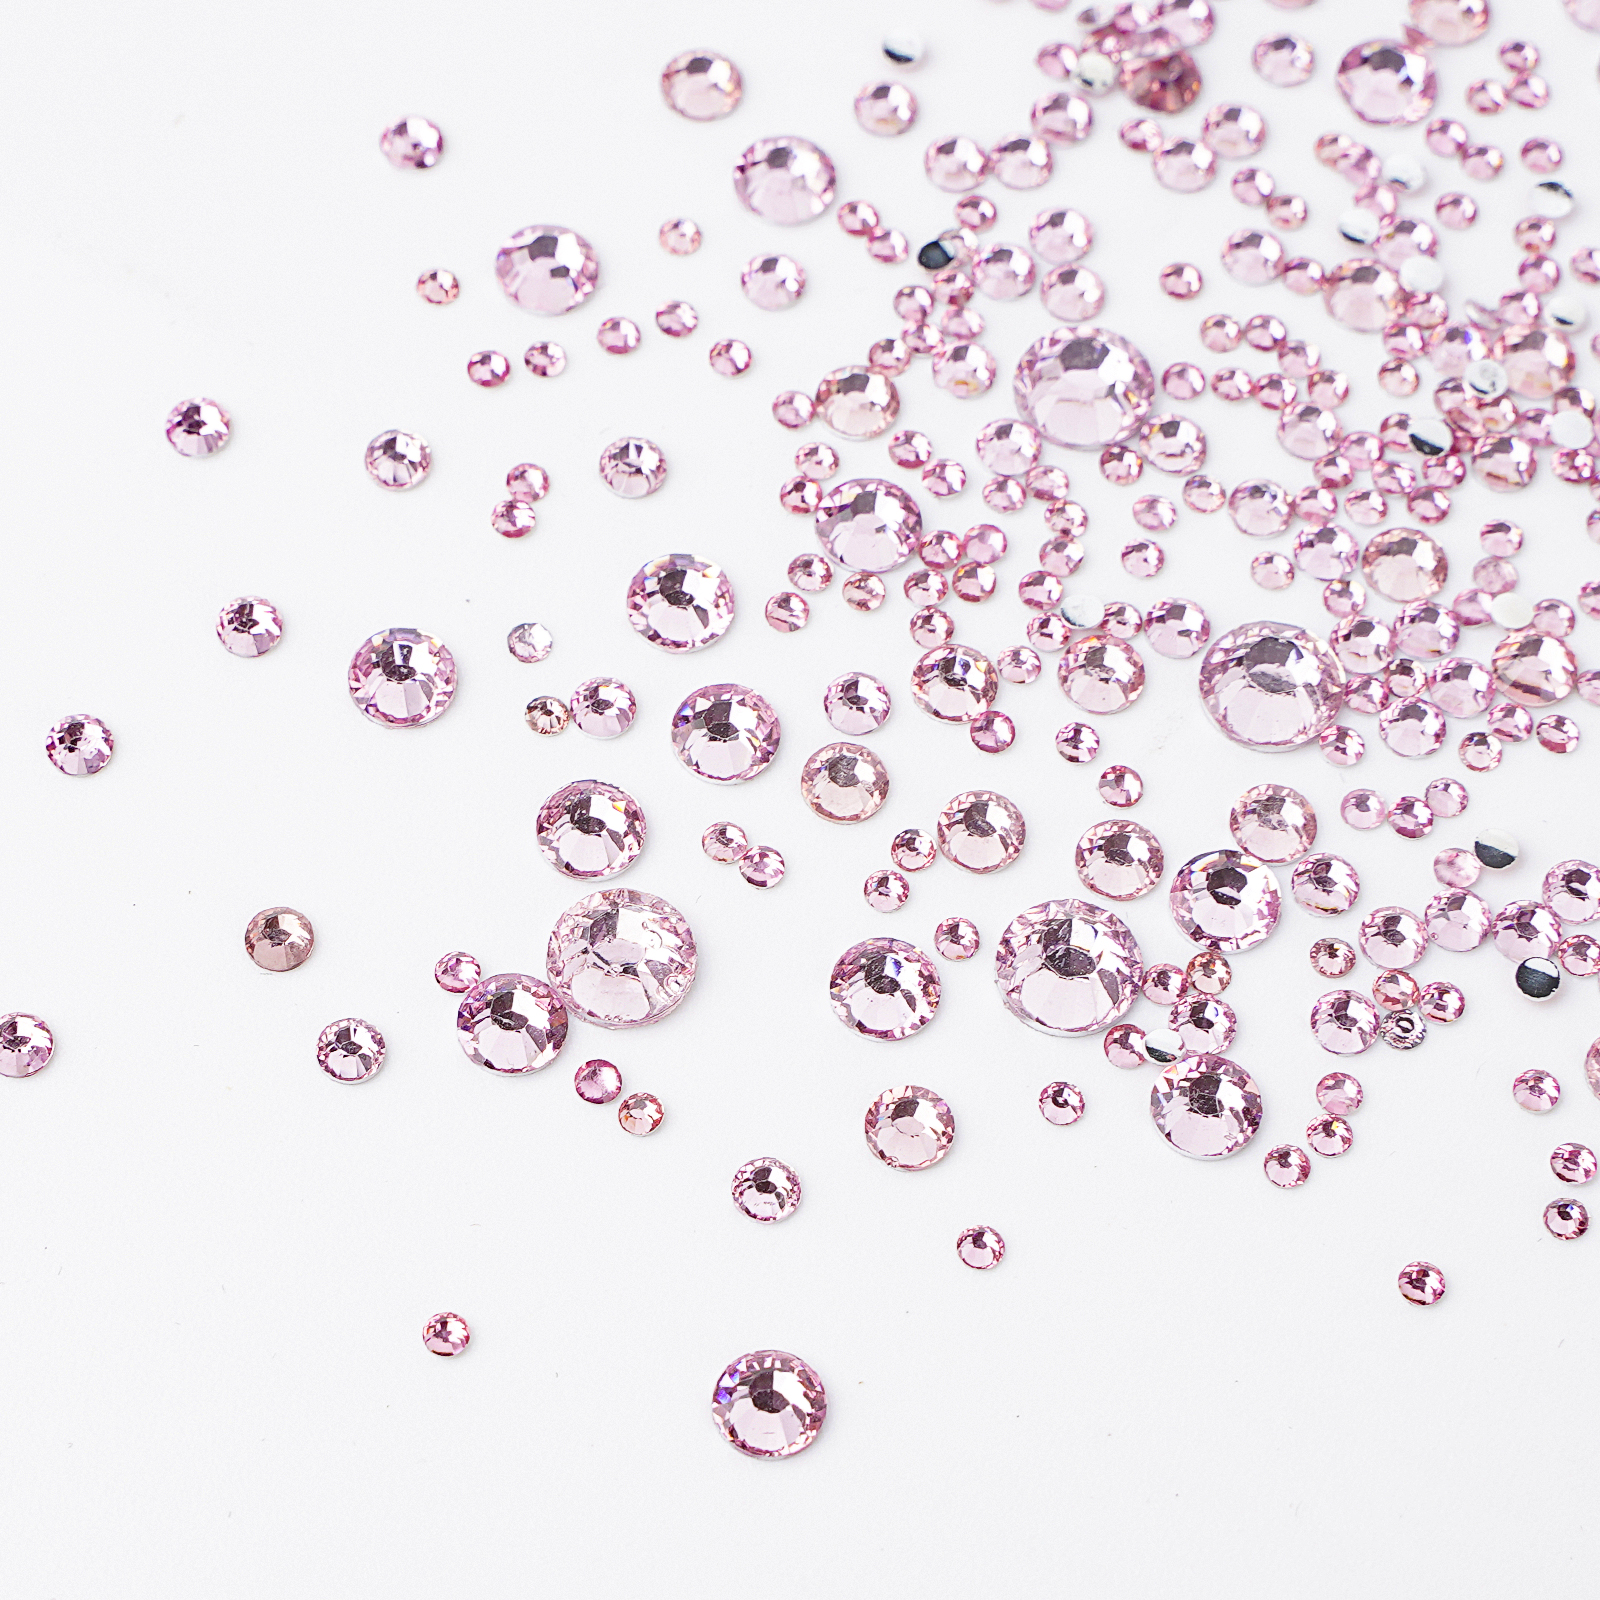  Queenme 2mm Small Rhinestones for Nails Flat Back Glass Nail  Crystals for Crafts Eye Makeup, Round Flatback Stones Shiny No Dull Gems  Sparkly Diamond SS6 2880pcs : Beauty & Personal Care